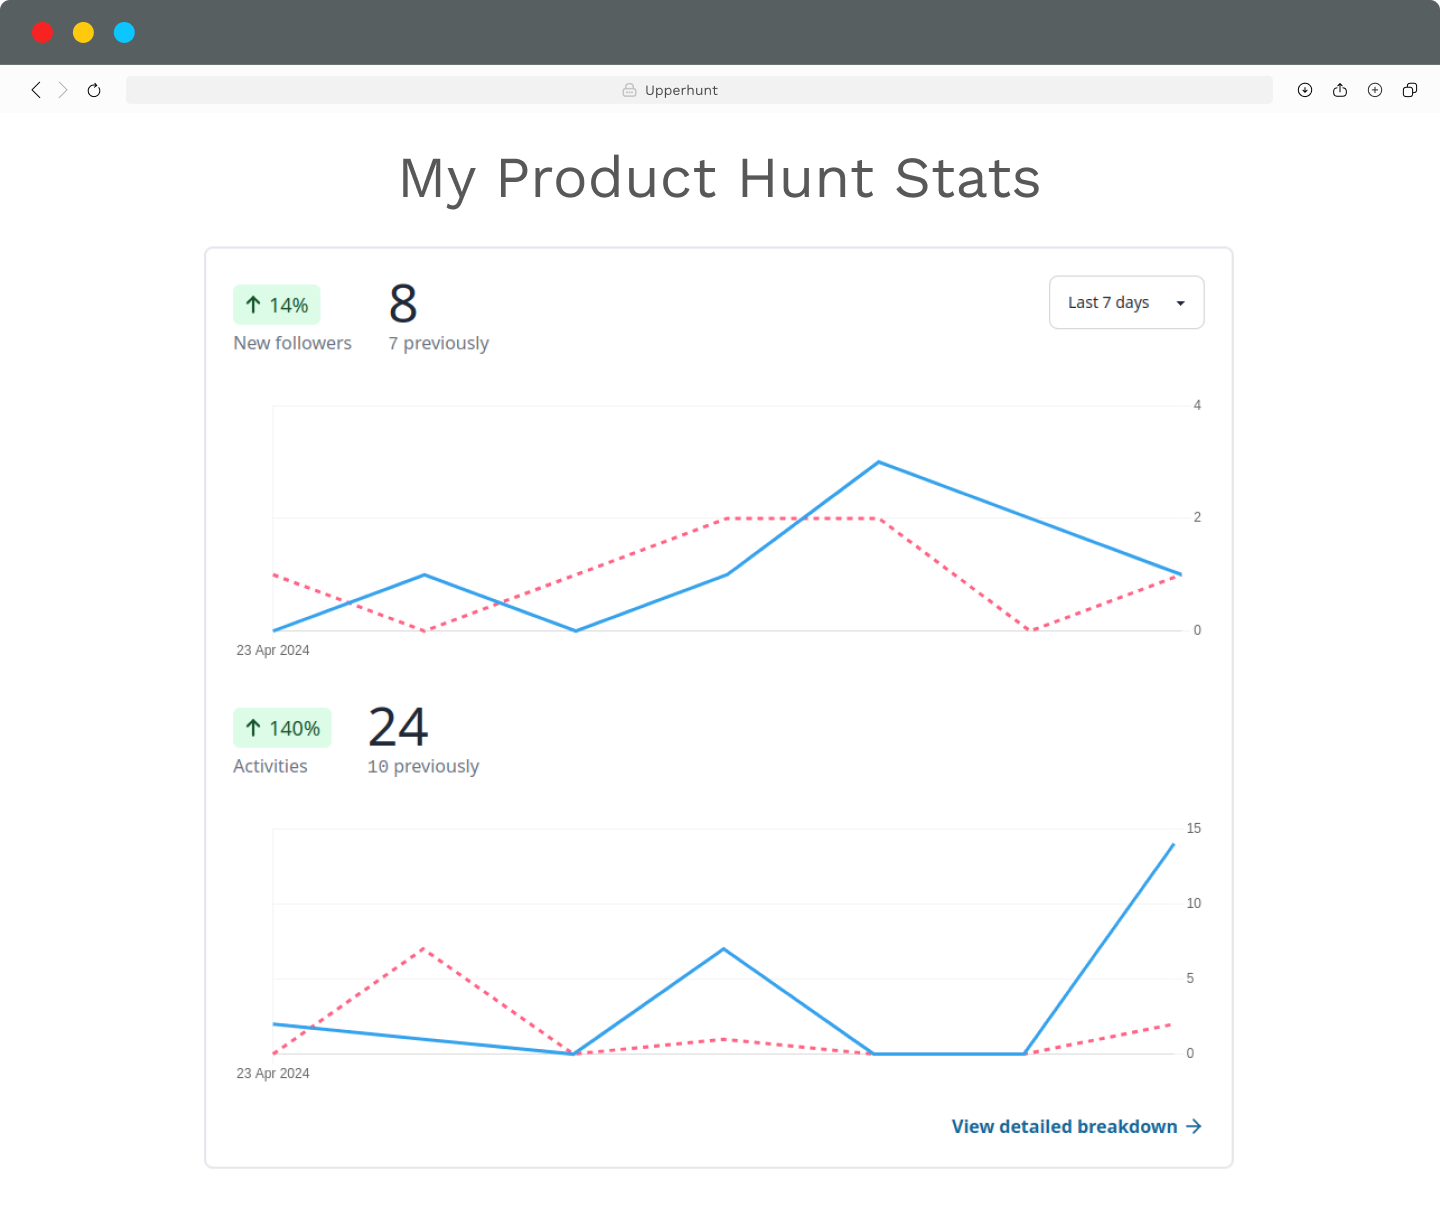 Upperhunt is for marketers and founders who are unfamiliar with Product Hunt, or those who their launch to reach a top position